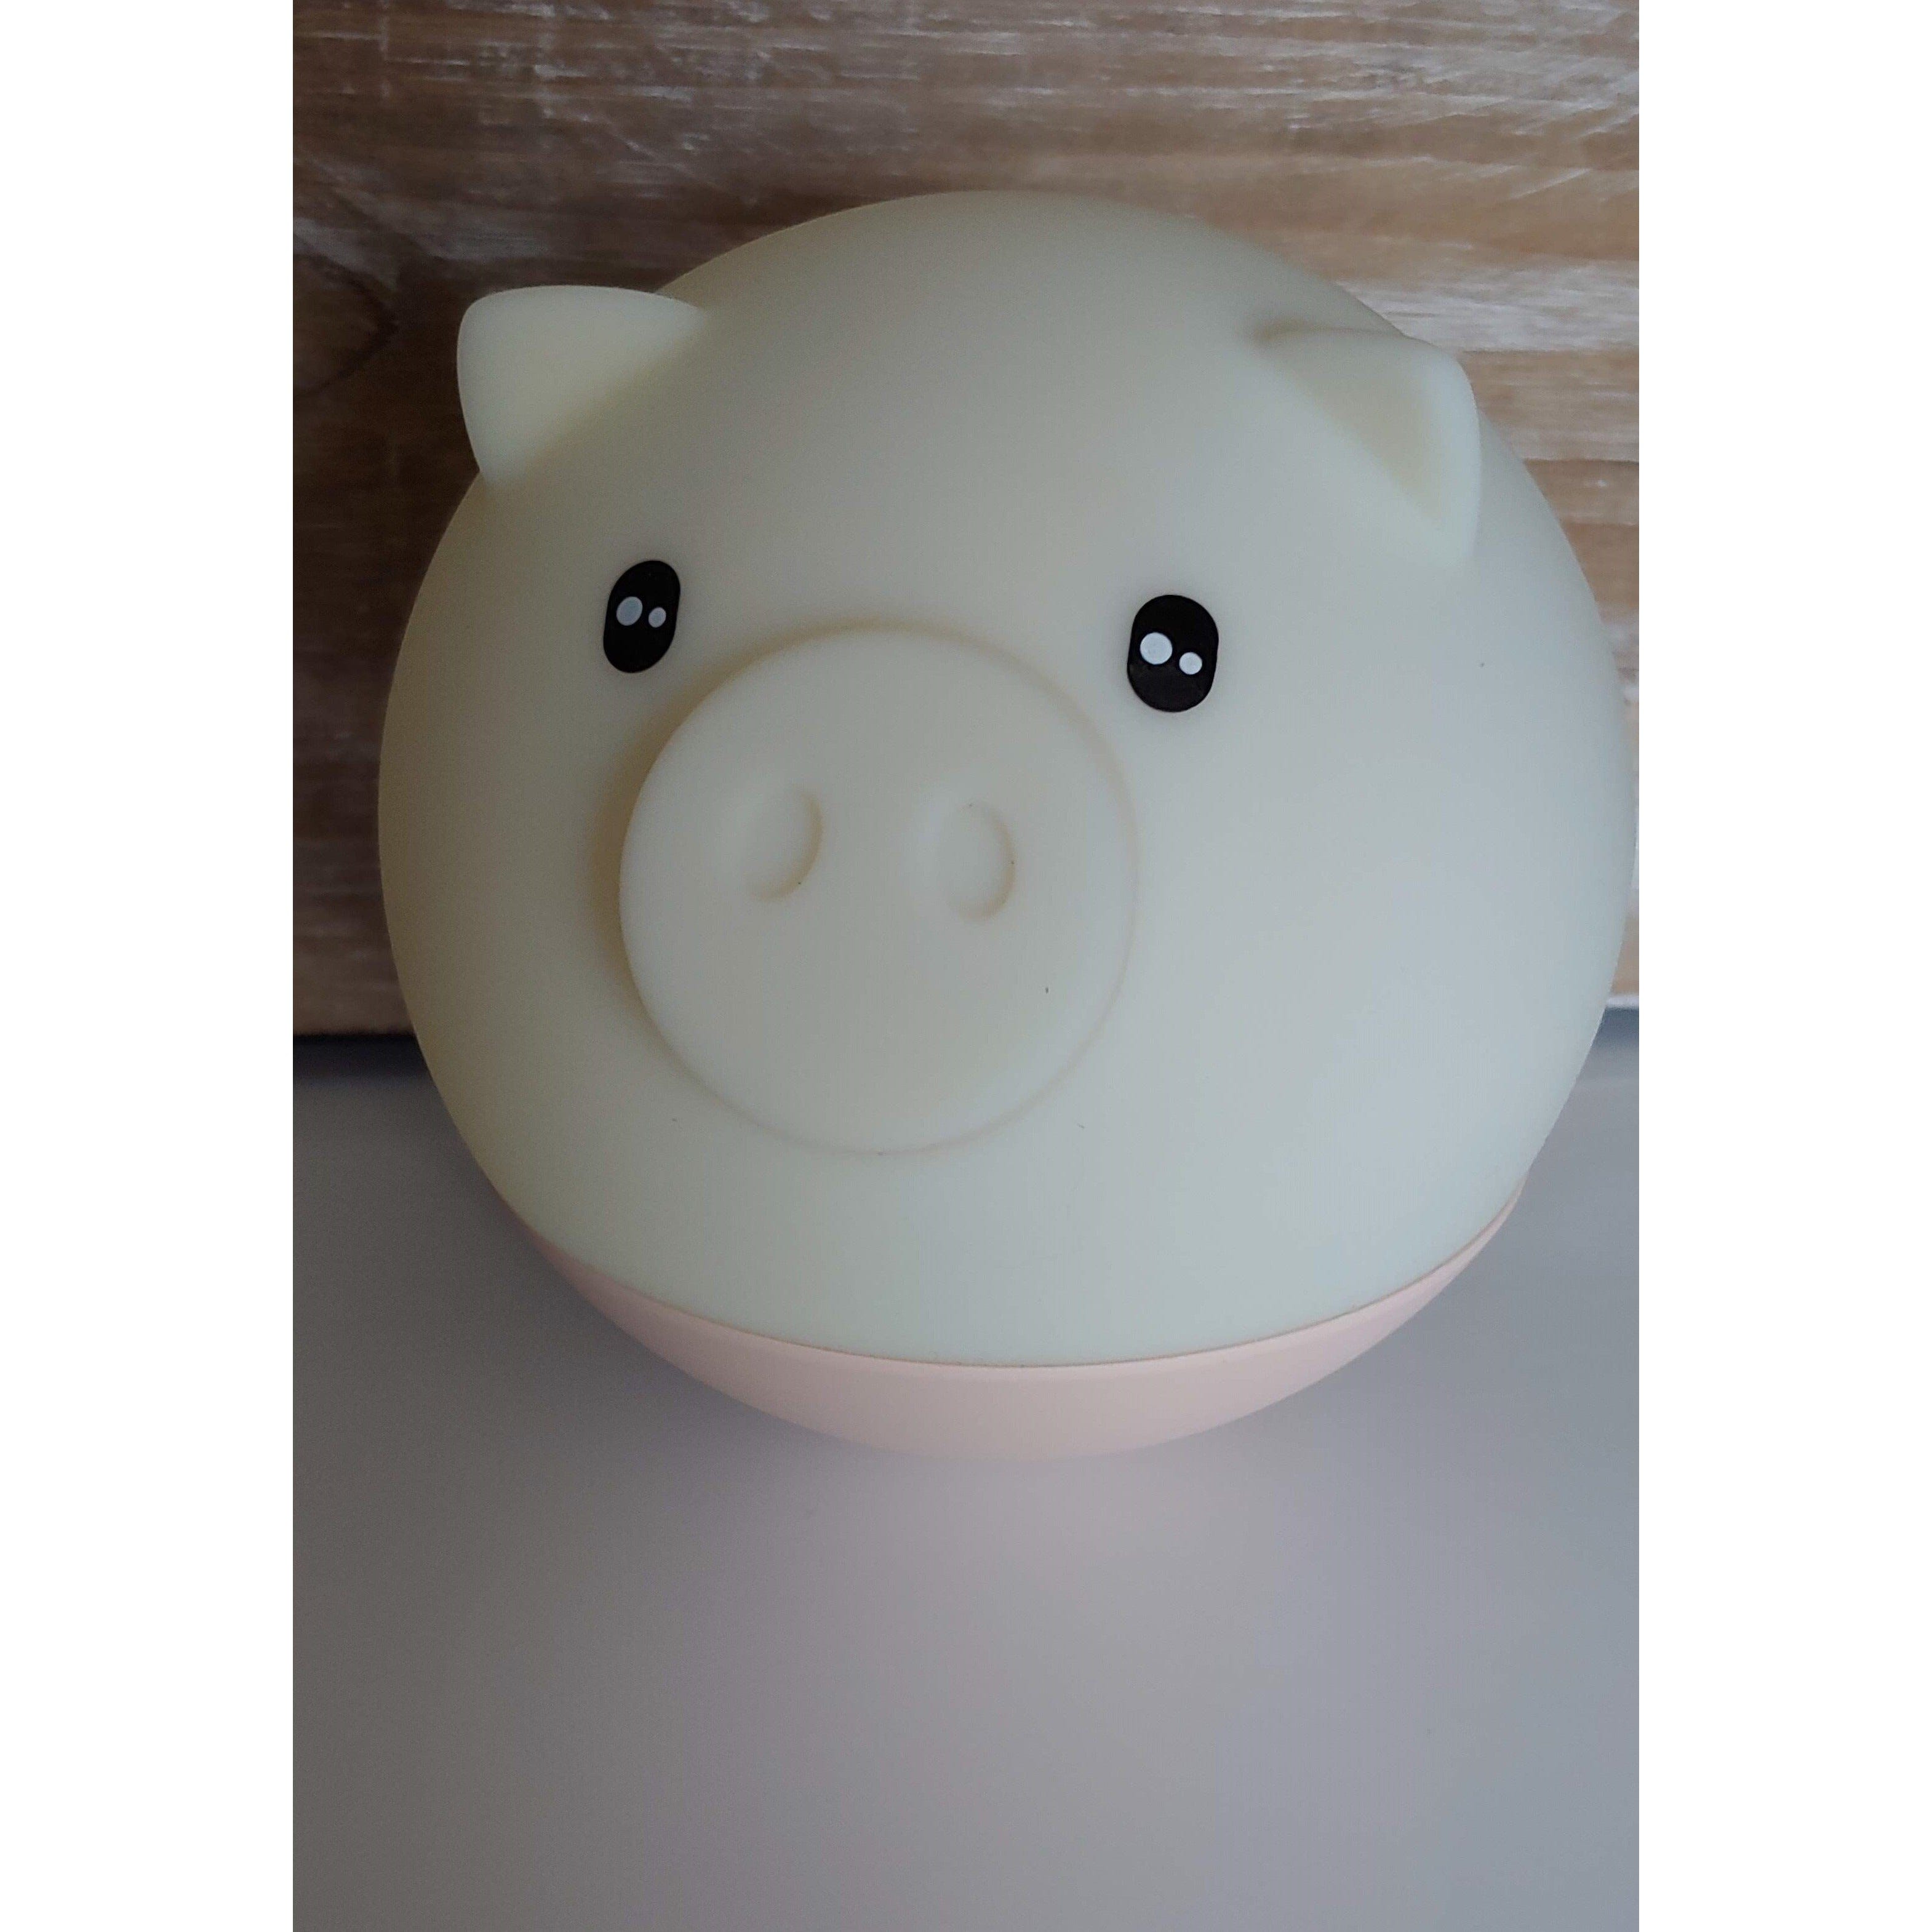 Pig Night Light, Cutest Little Piggy Light to Brighten the Darkness Just a Little - The Pink Pigs, Animal Lover's Boutique